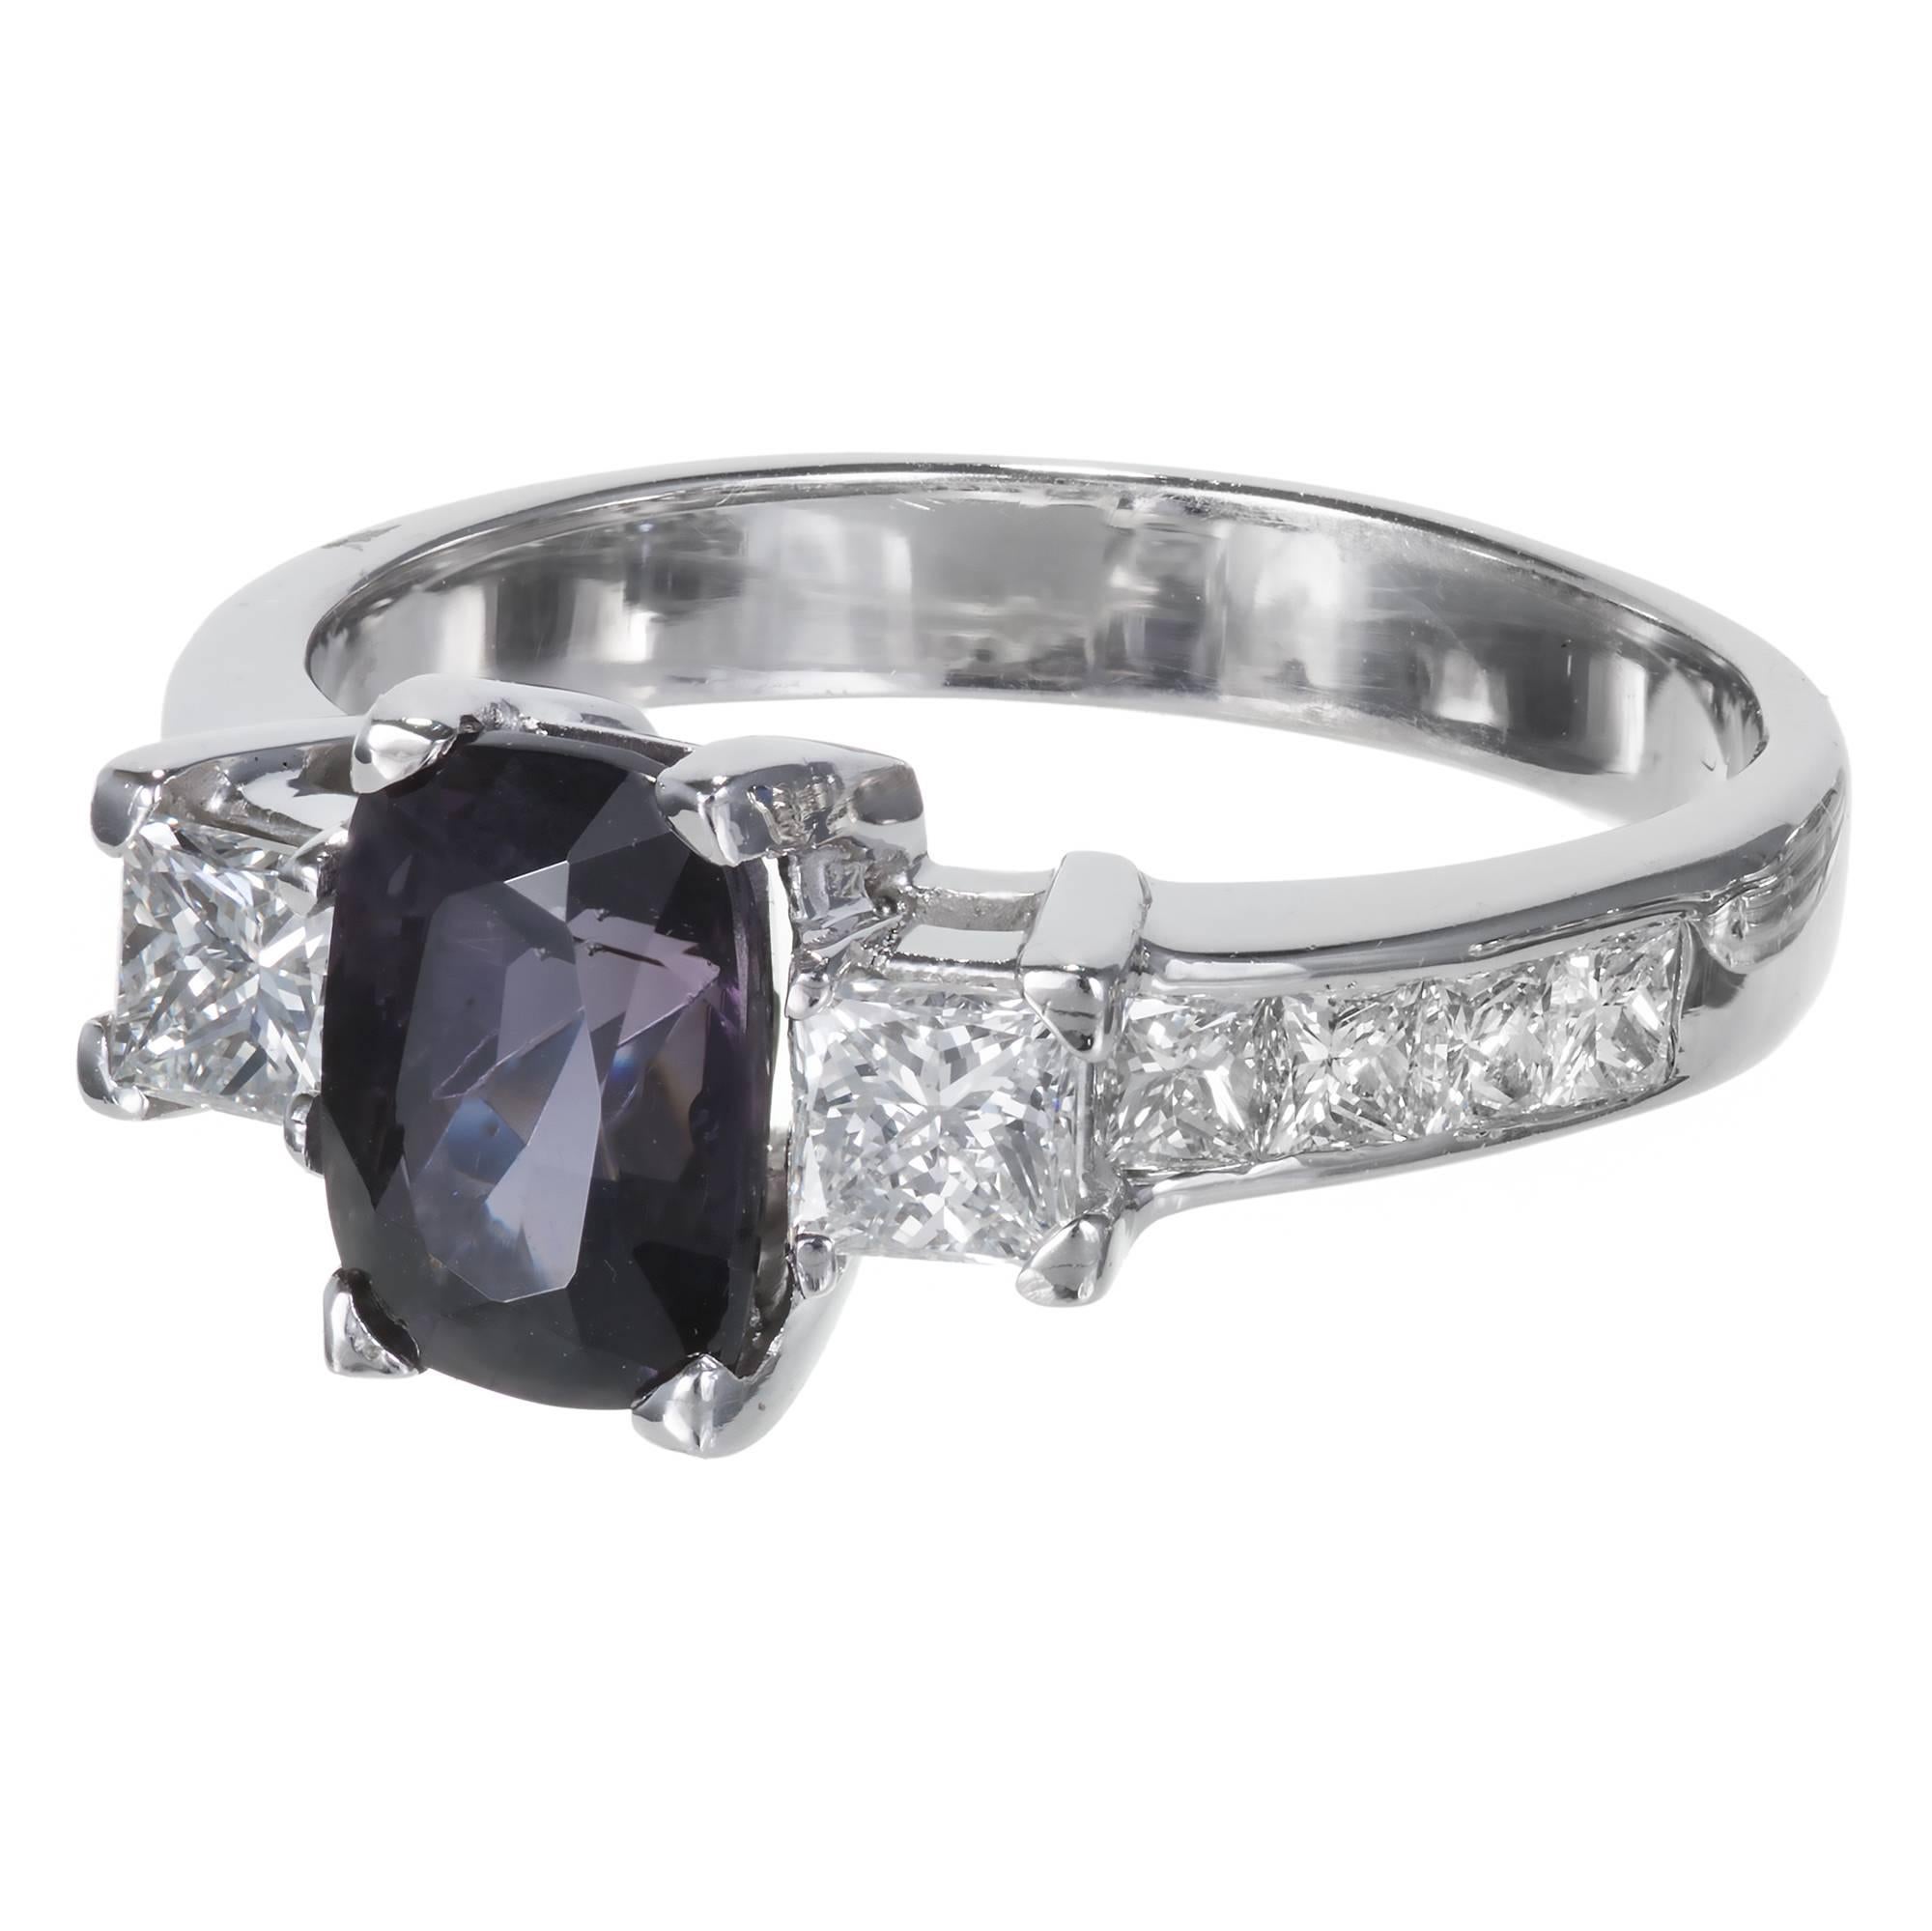 1.74 carat spinel 14k white gold and Platinum engagement ring. Center set with an GIA certified deep purple cushion cut Spinel accented with Princess cut bright sparkly side diamonds. 

 1 cushion cut genuine dark purple Spinel, approx. total weight